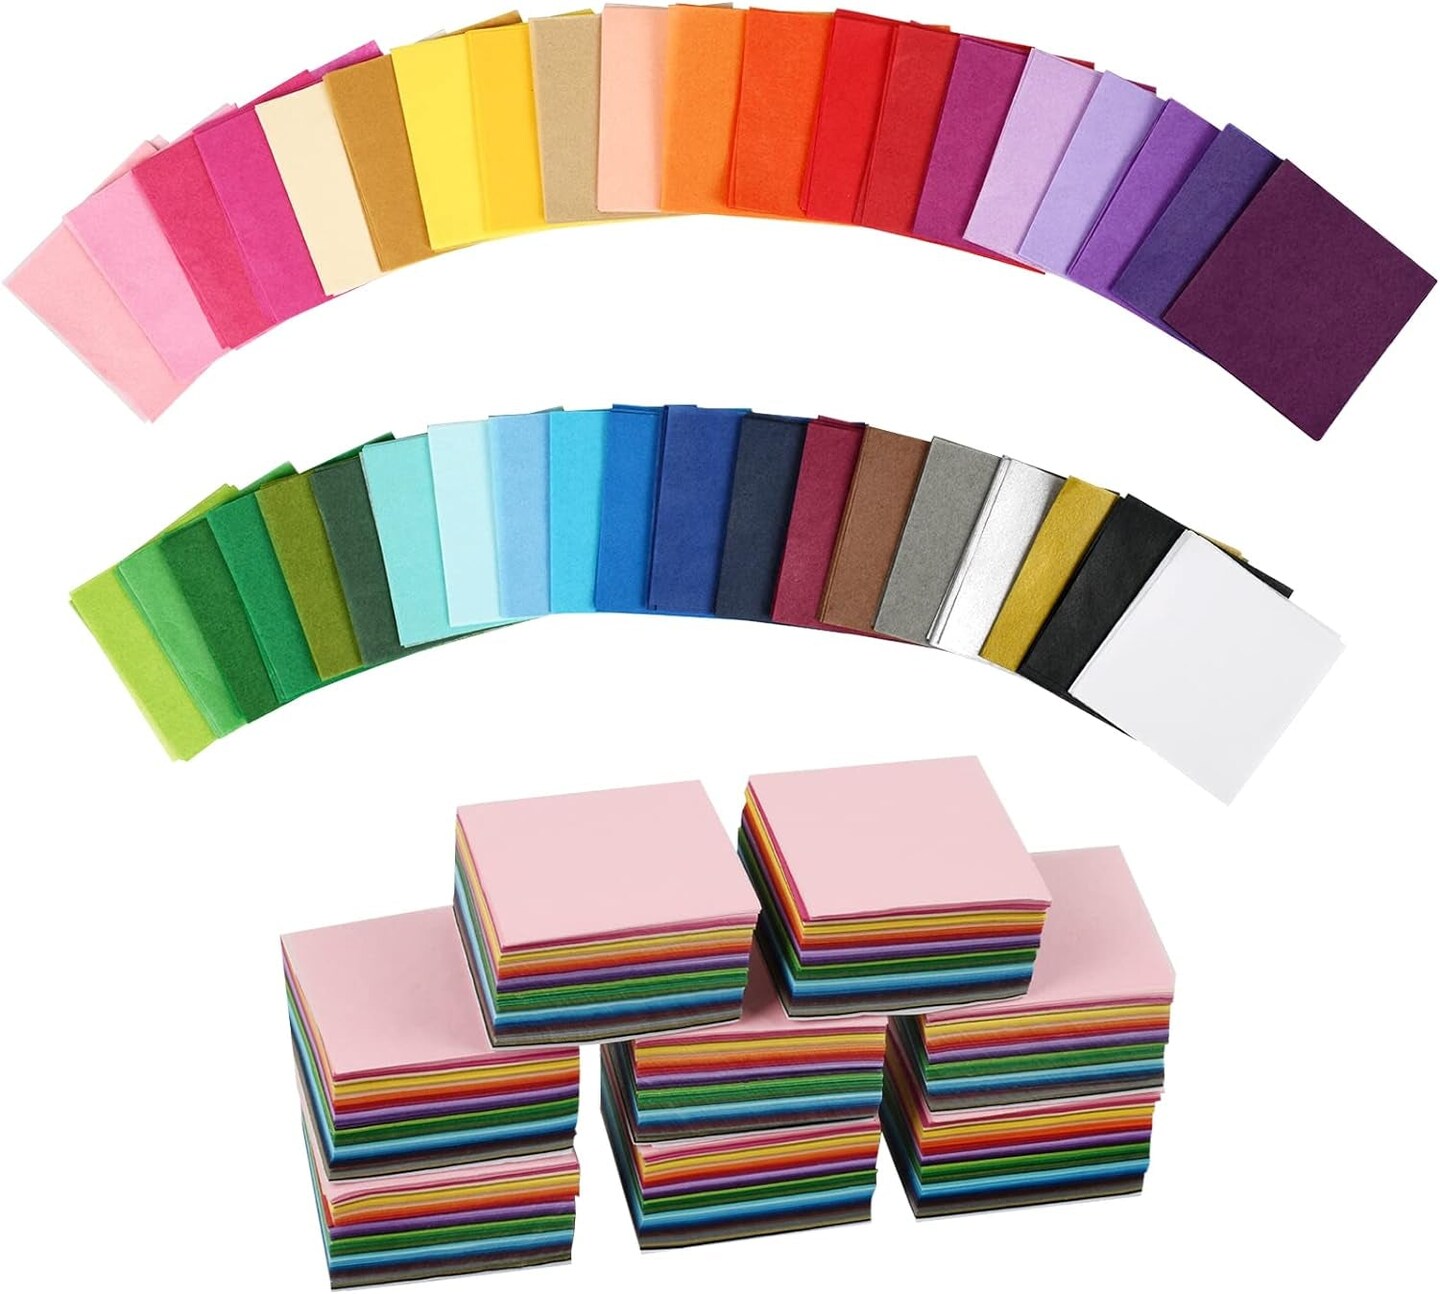 5400 Pcs 1 Inch Tissue Paper Squares, 36 Assorted Colored Tissue